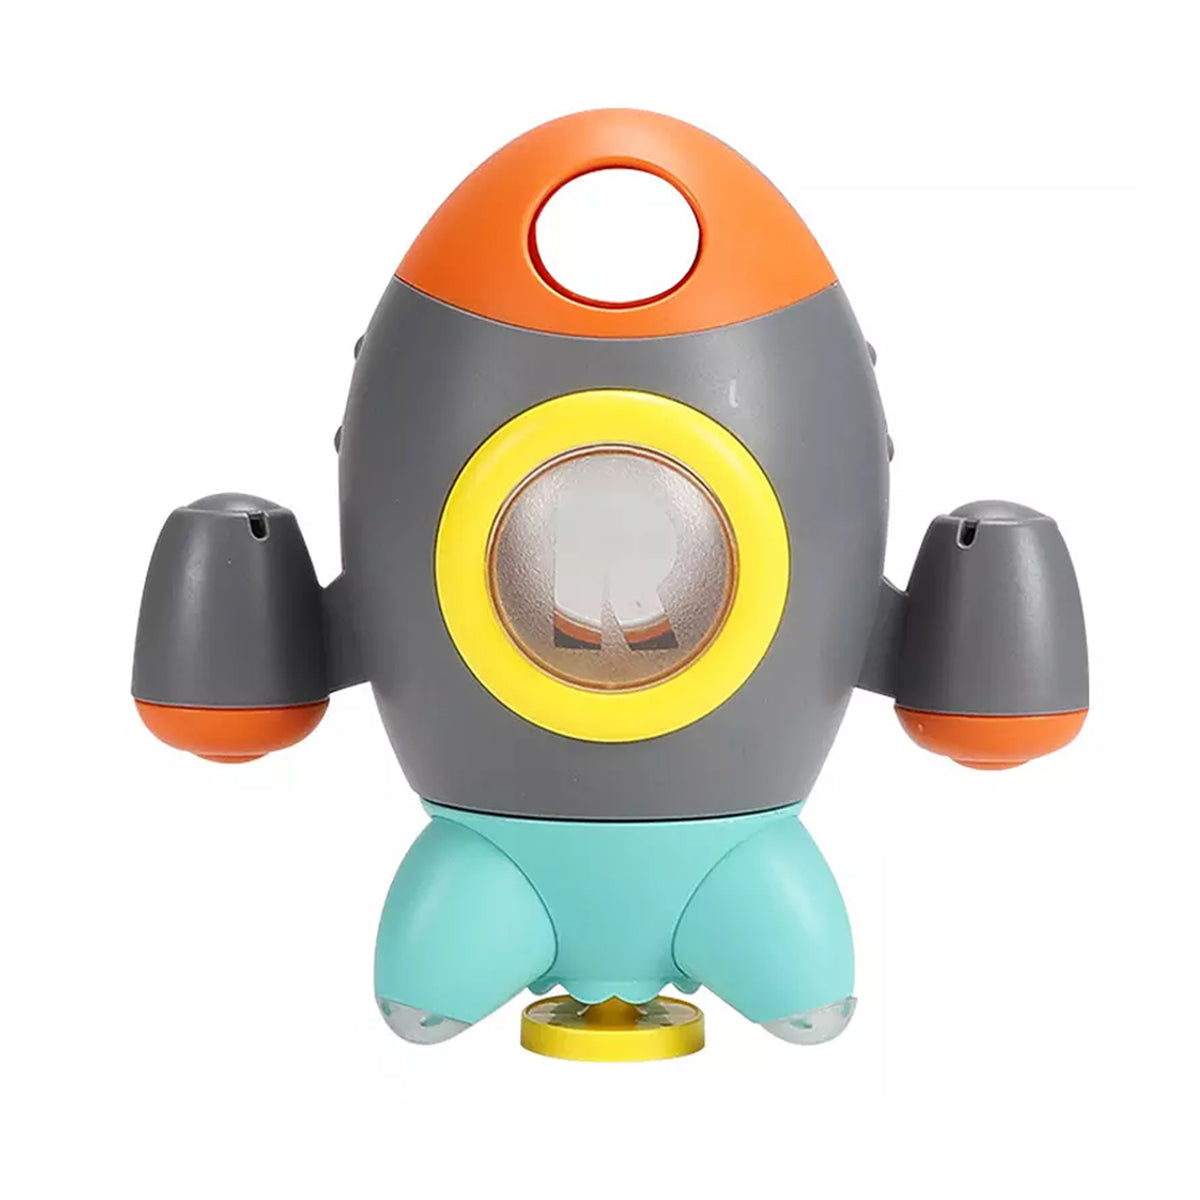 Rotating Rocket Waterfall Spray Water Bath Tub Shower Toy - Make Bath Time Fun and Exciting